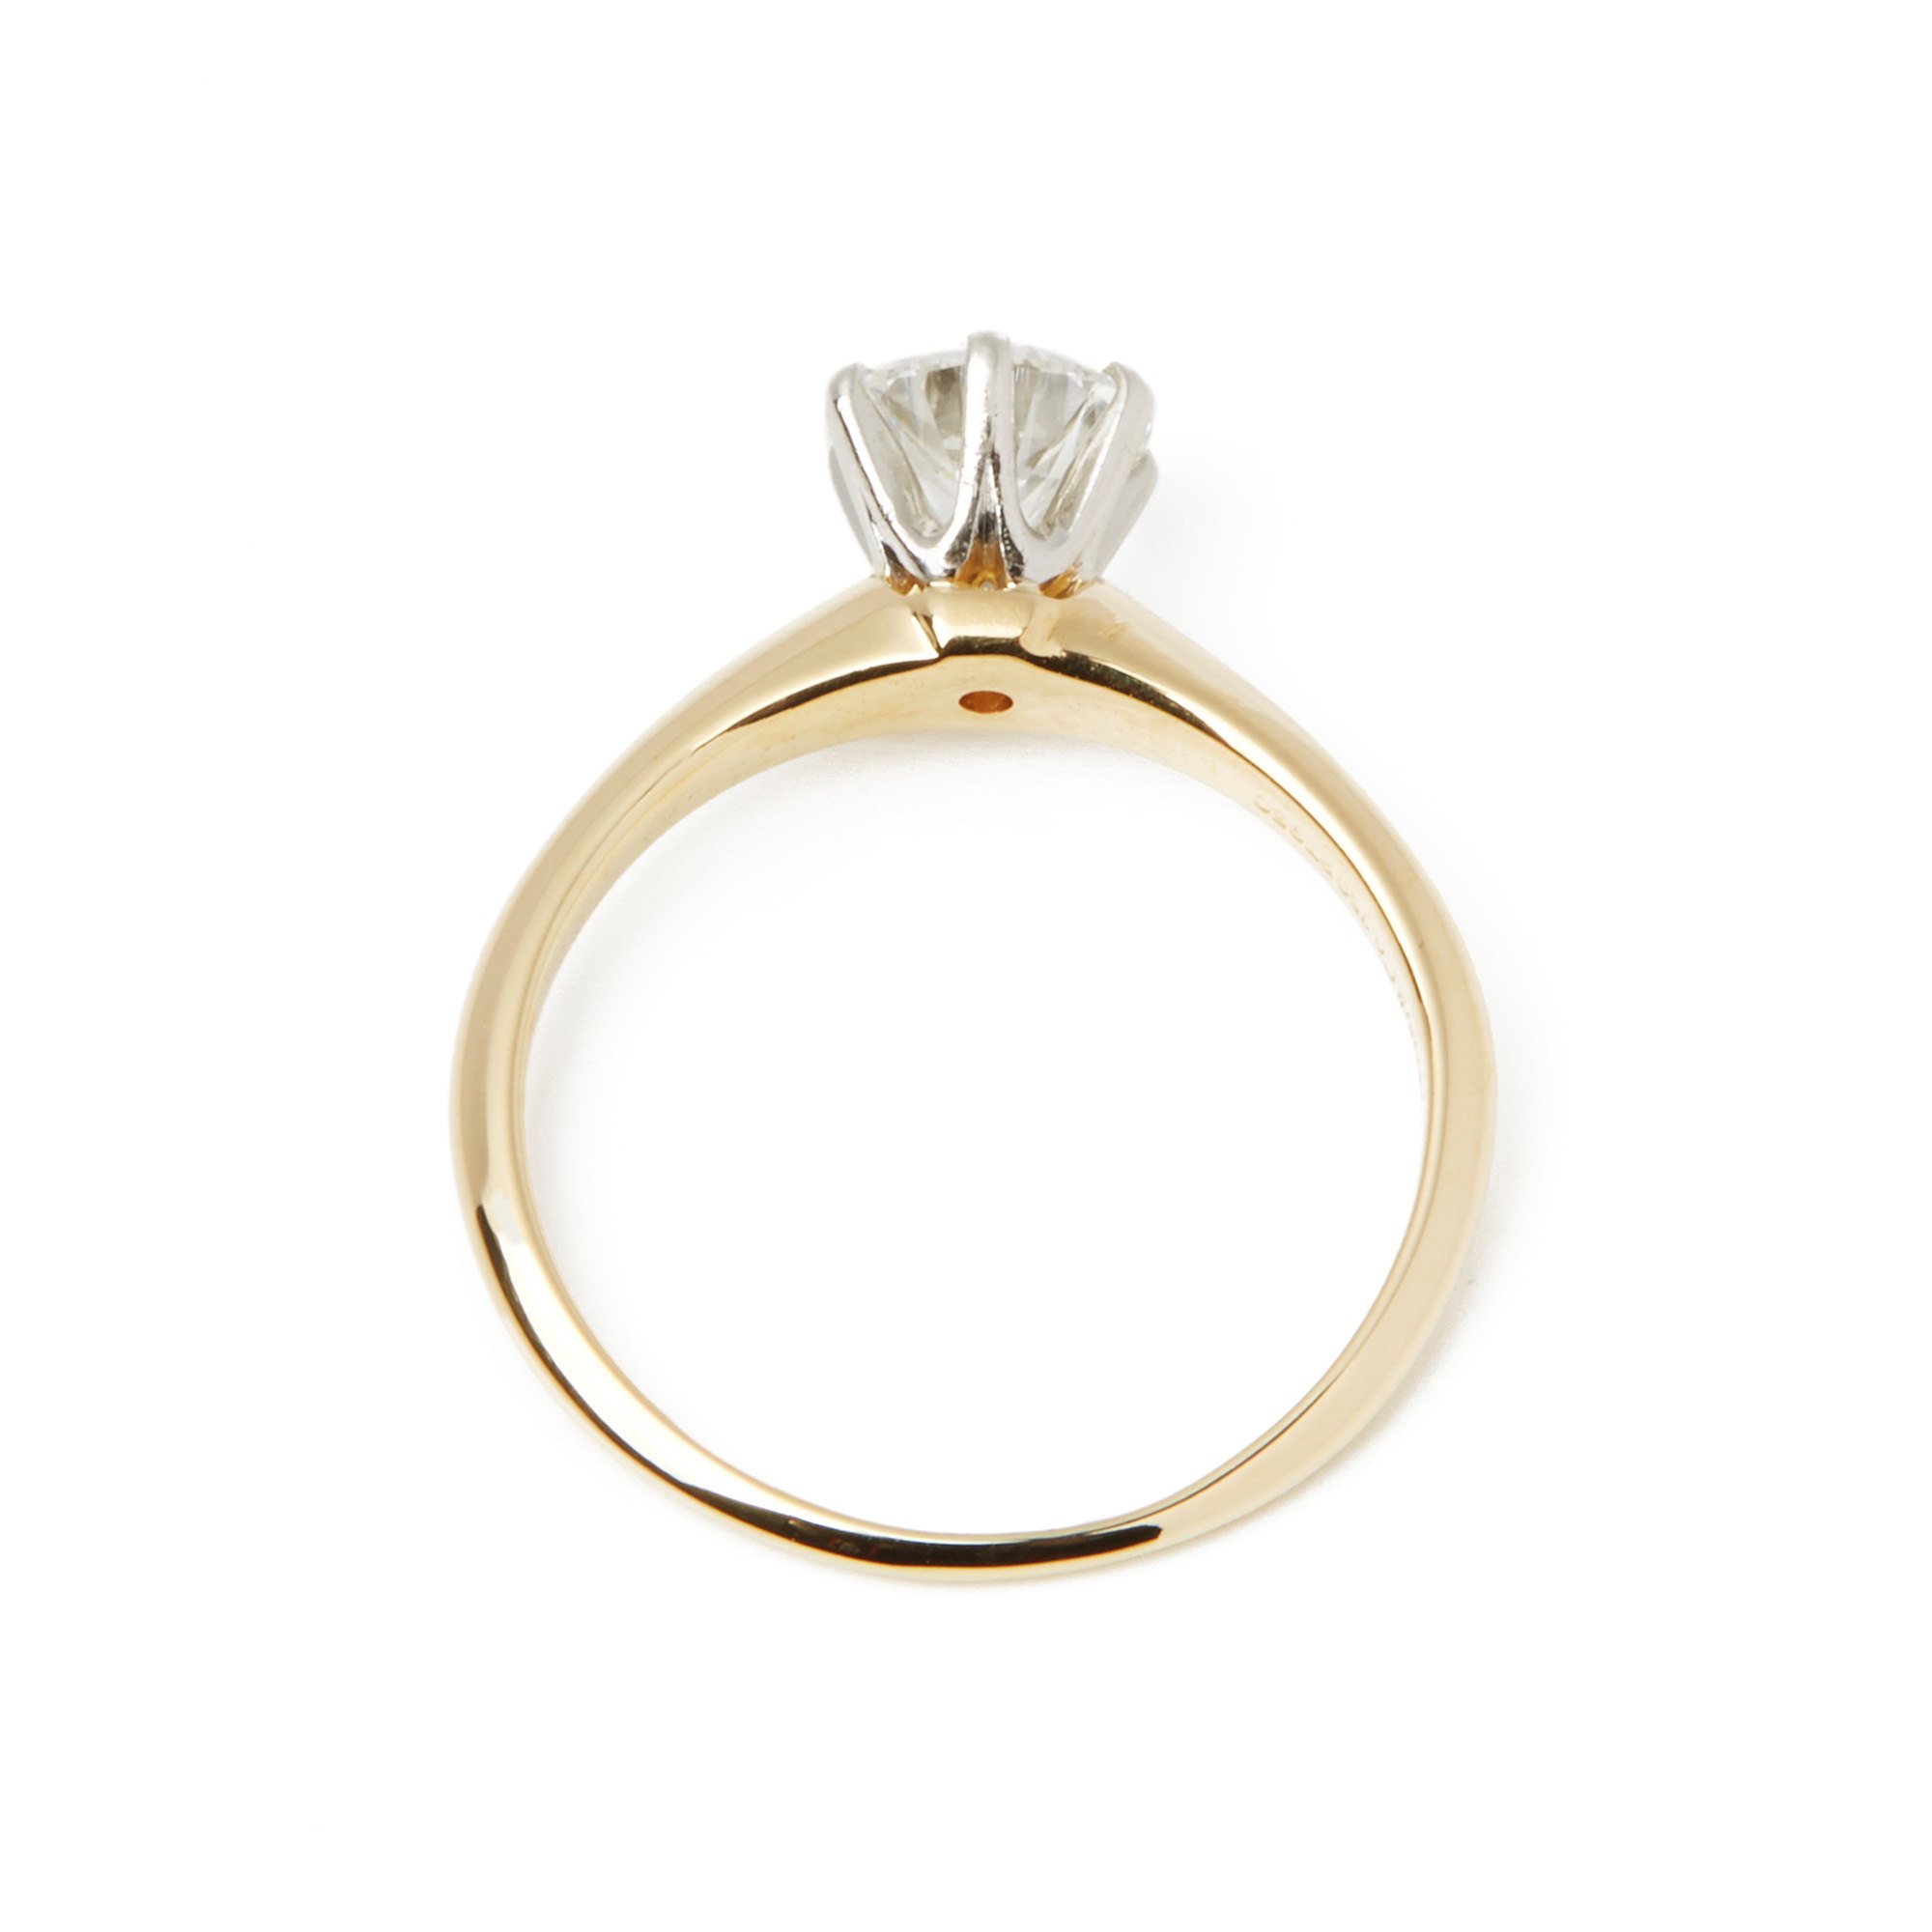 Tiffany & Co. 18k Yellow Gold Solitaire Diamond Ring